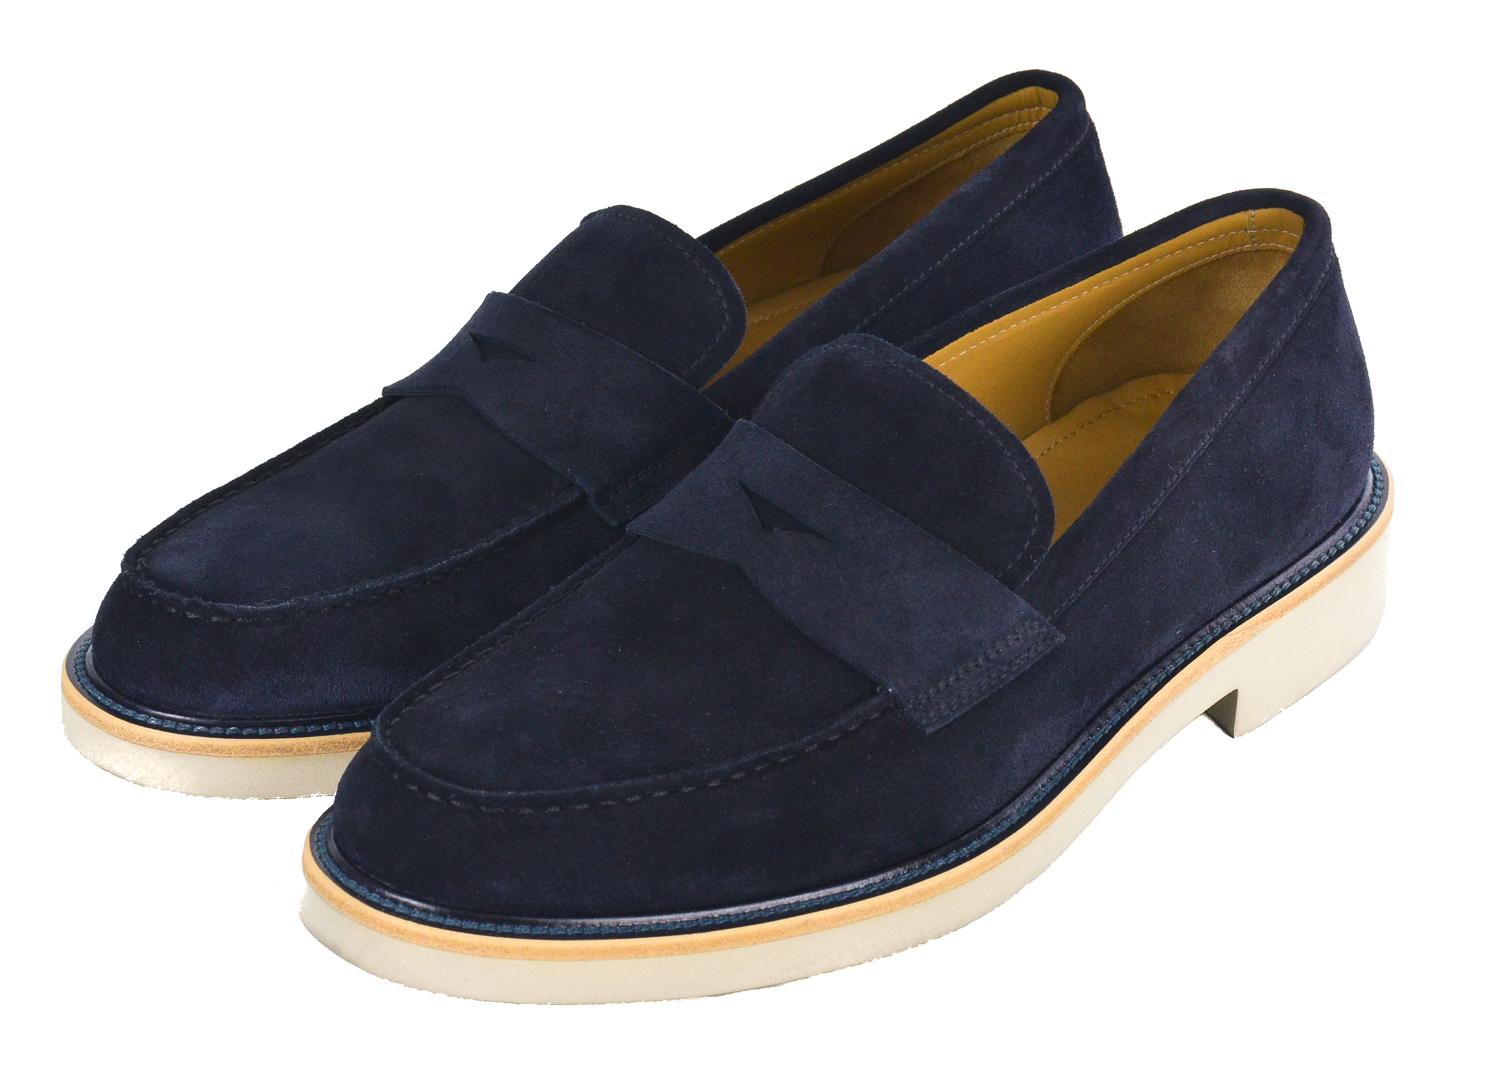 Take the time to embrace the moment in your Giorgio Armani Loafers. These shoes feature a rich navy blue colored woven supple suede, crisp white rubber sole, and classic penny par. You can pair these shoes with a dark blue blazer, crisp white top,